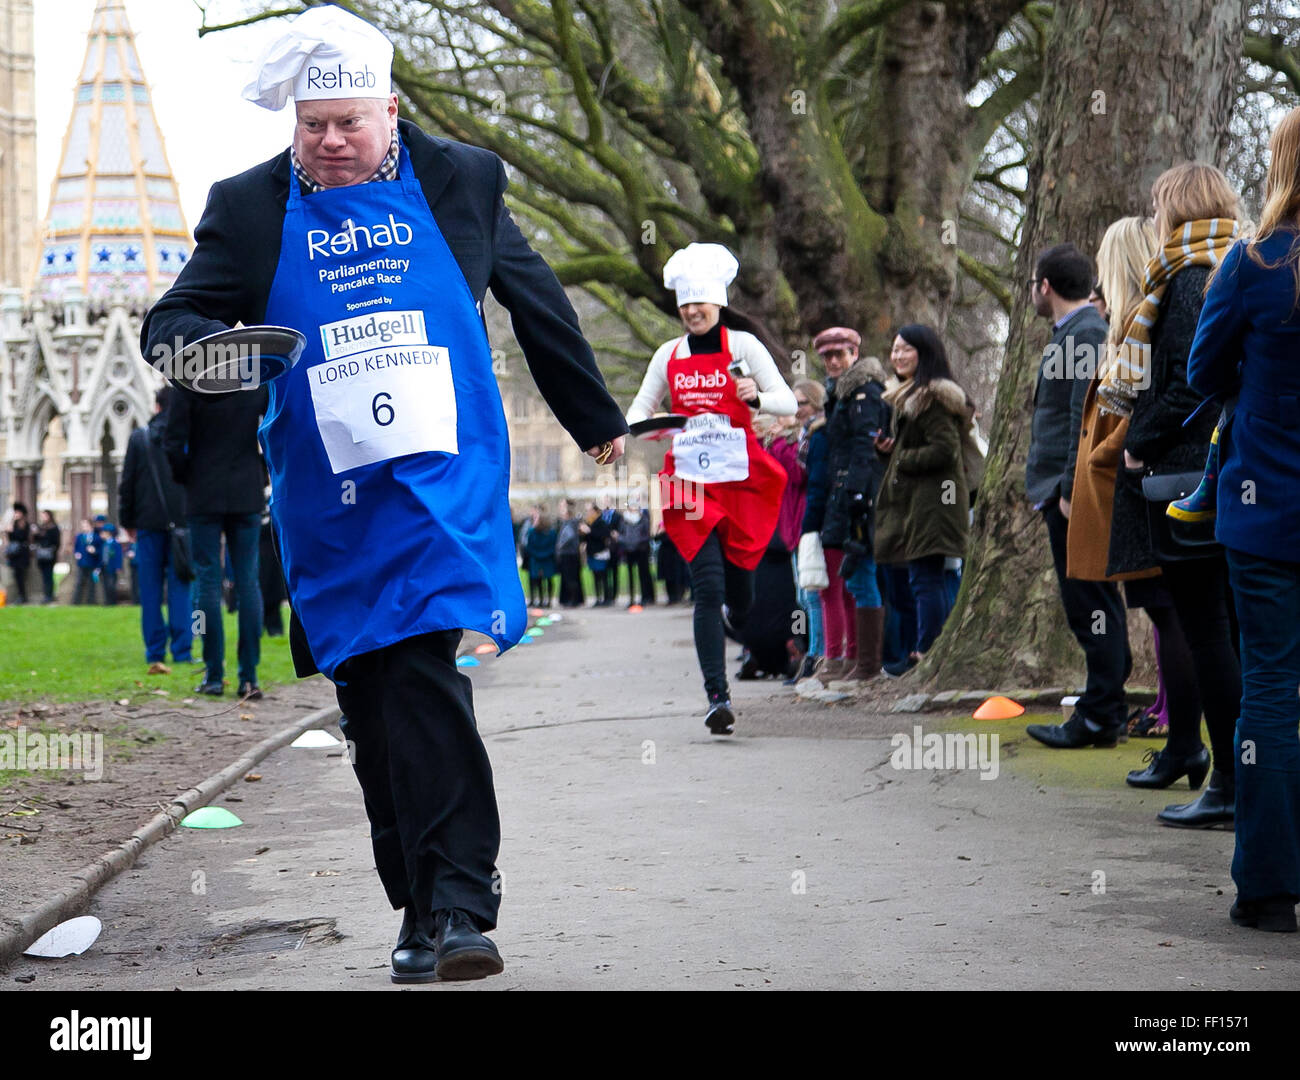 Westminster, London, United Kingdom. February 9th, 2016 - Lord Kennedy of Southwark and Mia Reakes of Reuters TV runs at the Parliamentary pancake race in aid of the disability charity, Rehab  Credit:  Dinendra Haria/Alamy Live News Stock Photo